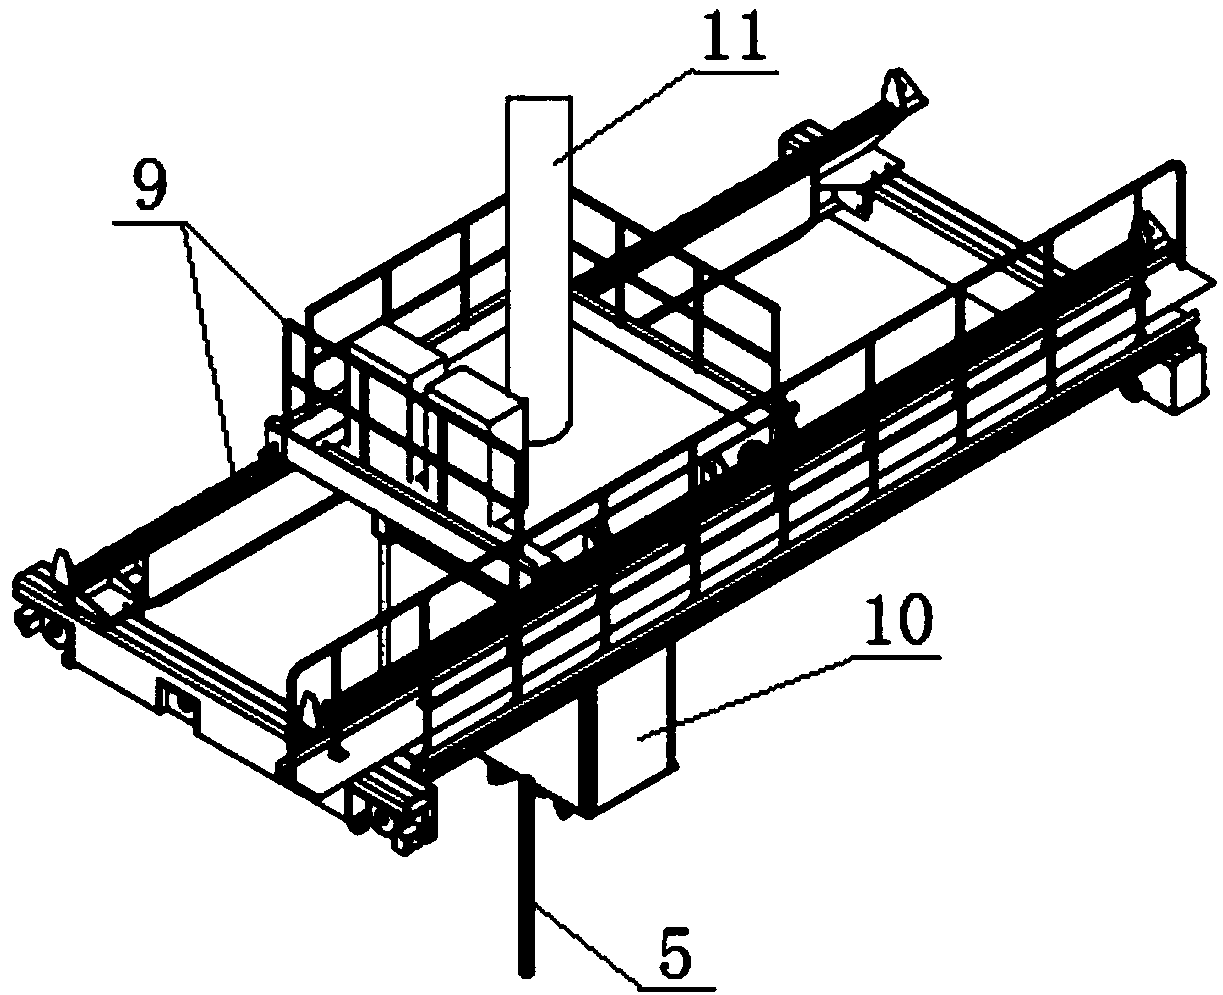 Disassembling technology and dedicated disassembling device of detector assemblies